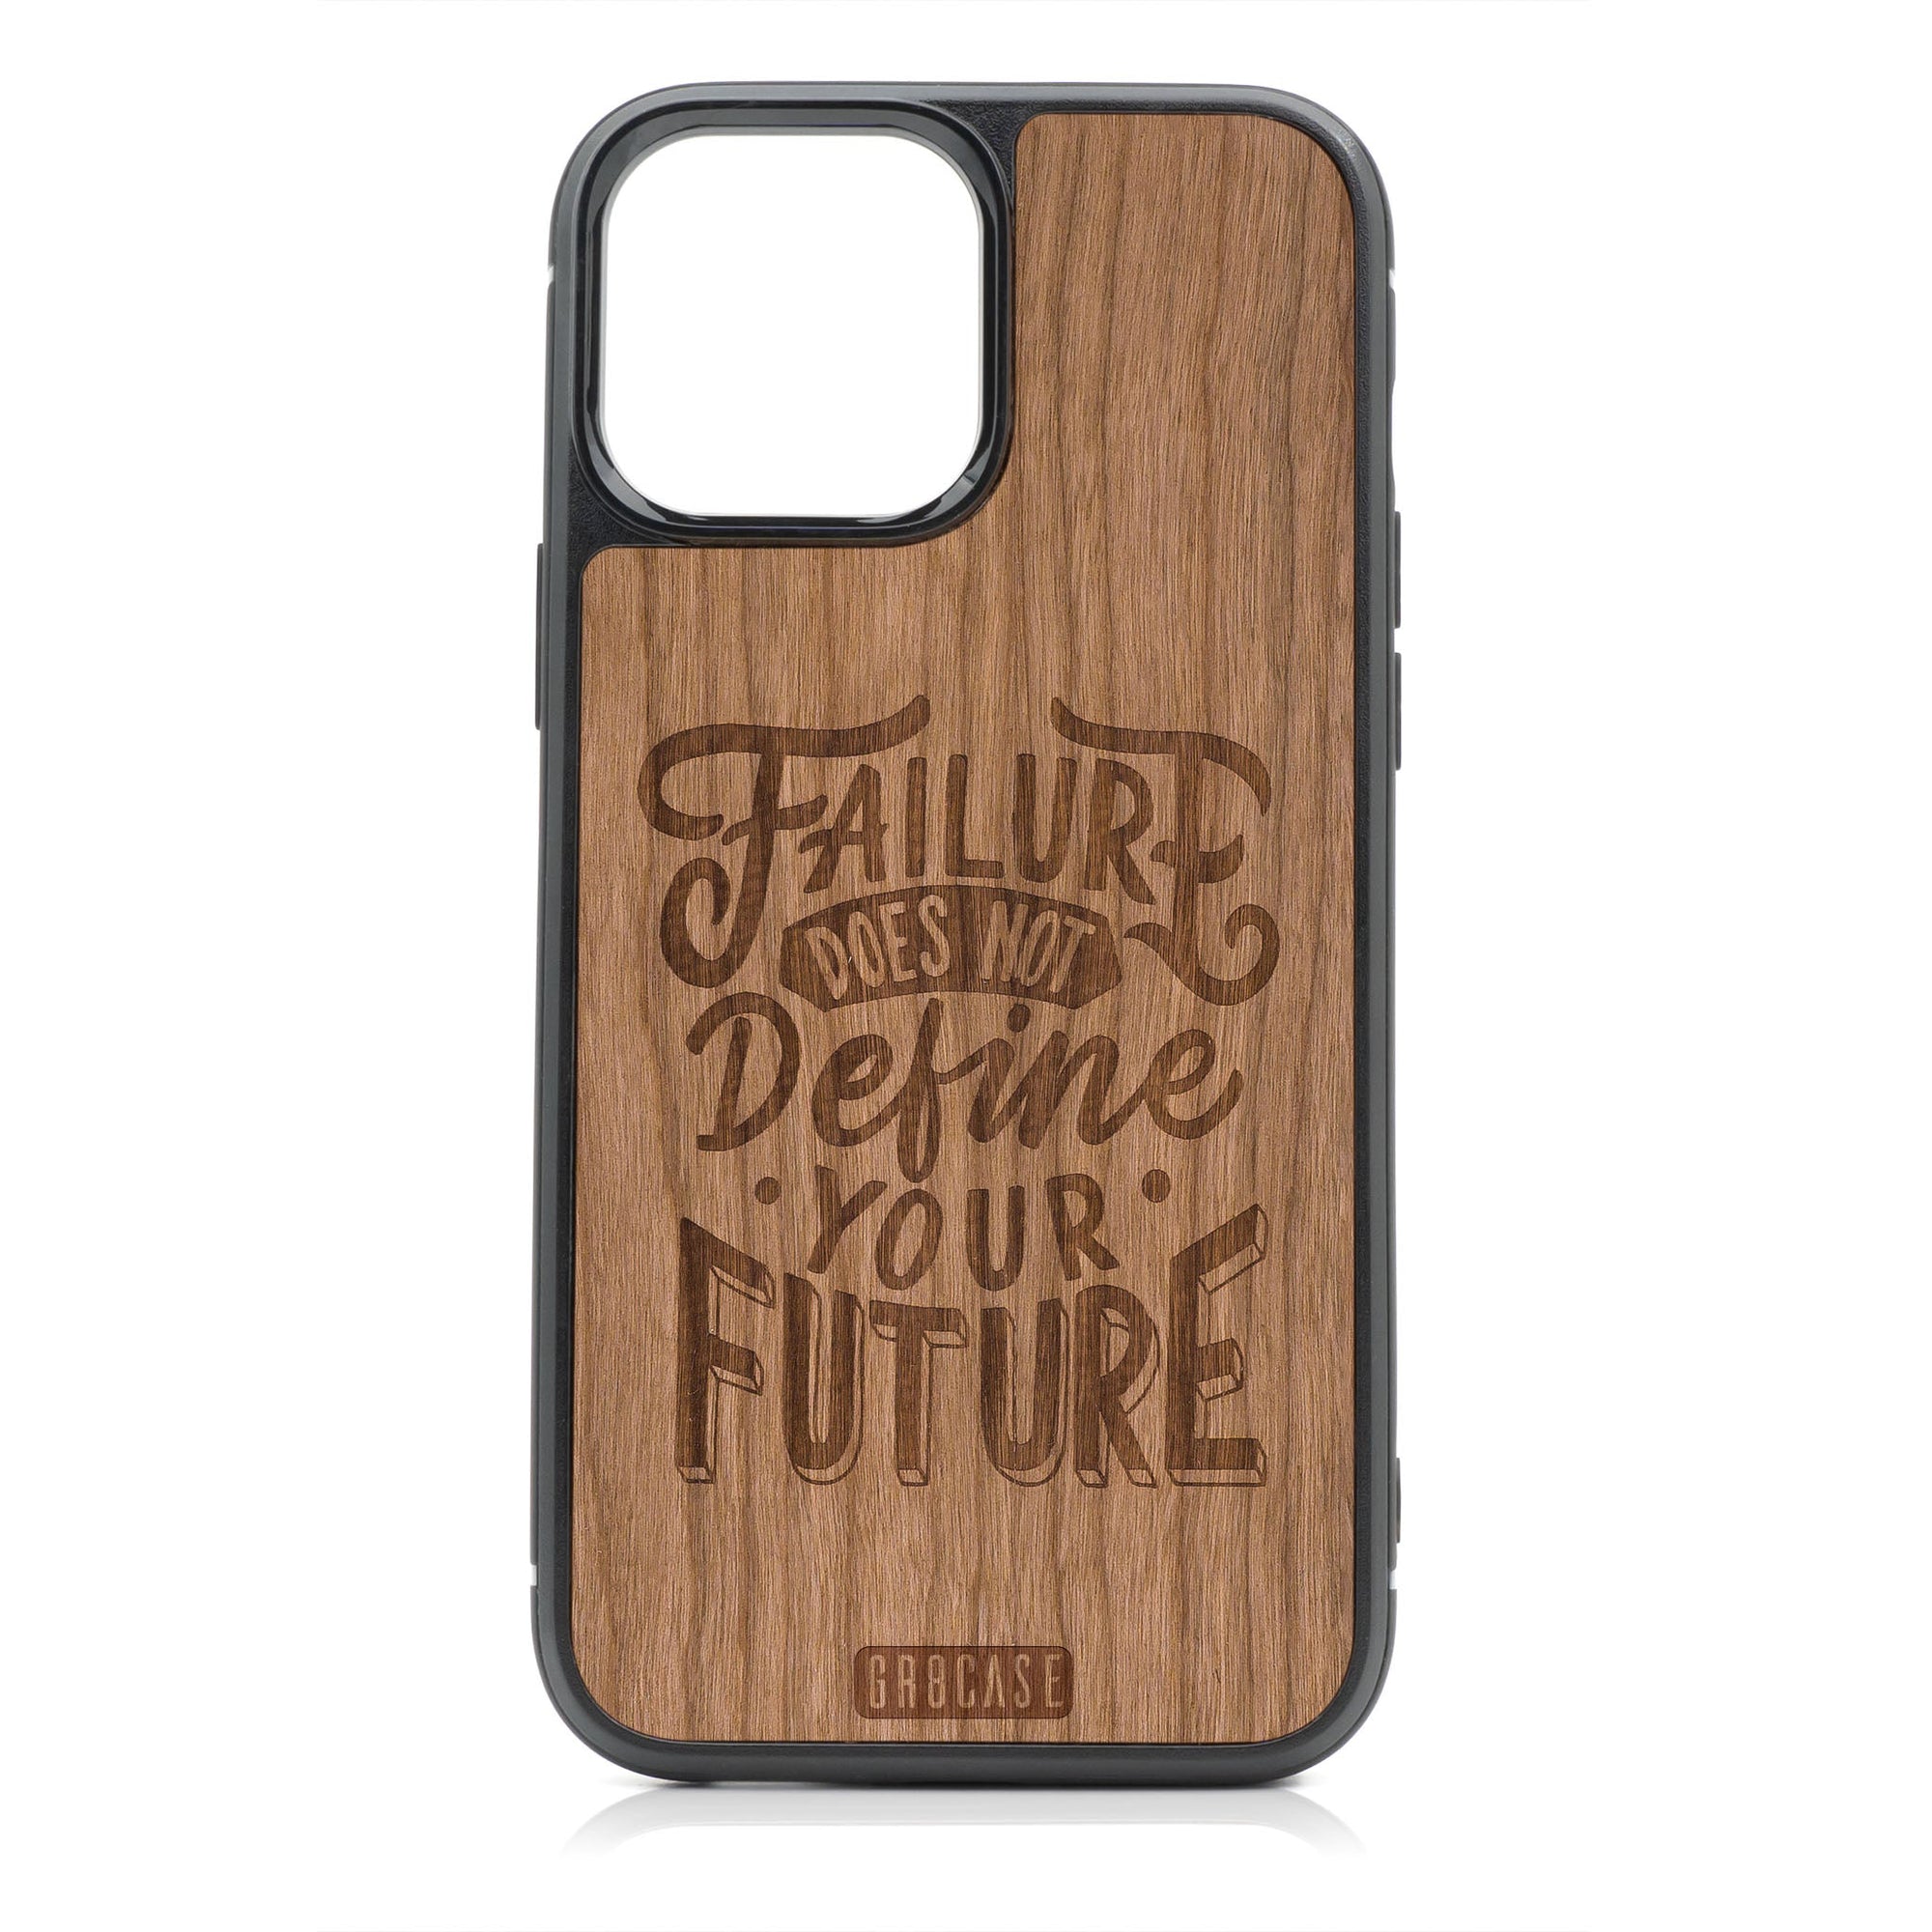 Failure Does Not Define Your Future Design Wood Case For iPhone 14 Pro Max